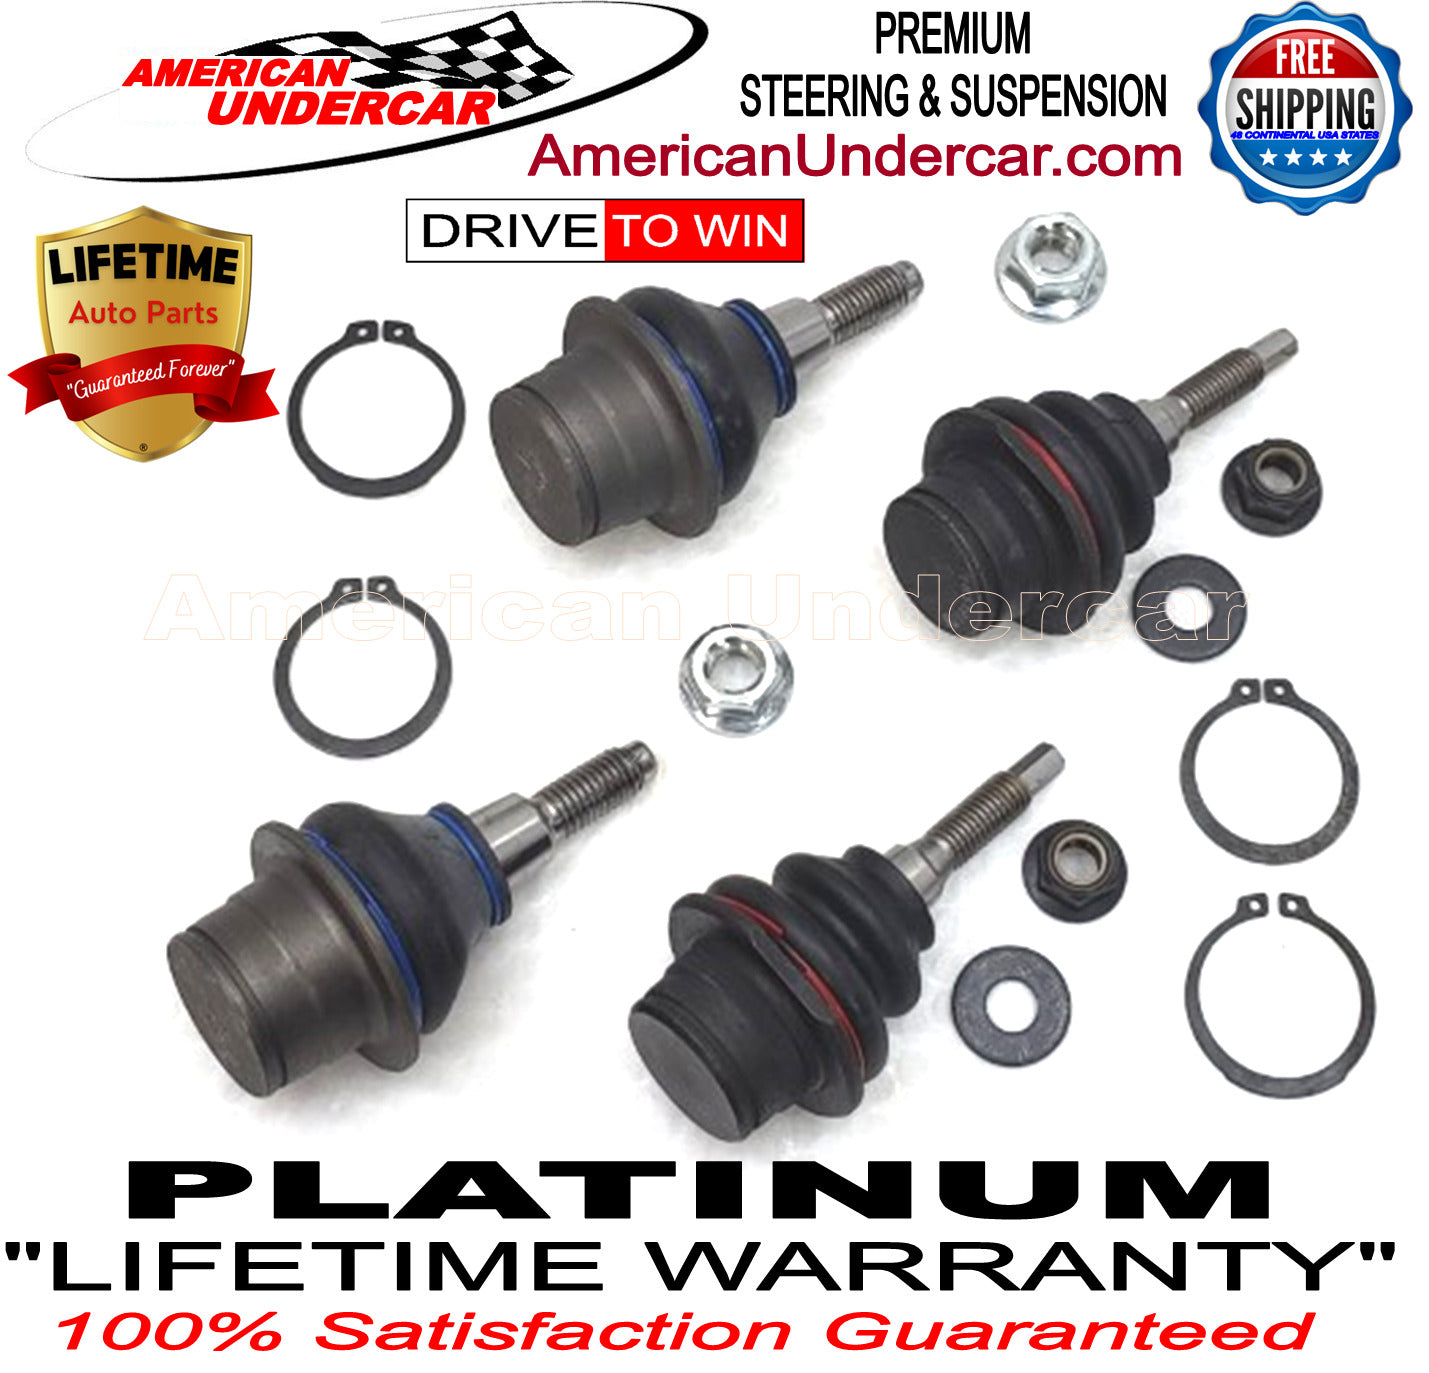 Lifetime Ball Joints Upper and Lower Suspension Kit for 2015-2020 Ford F150 2WD